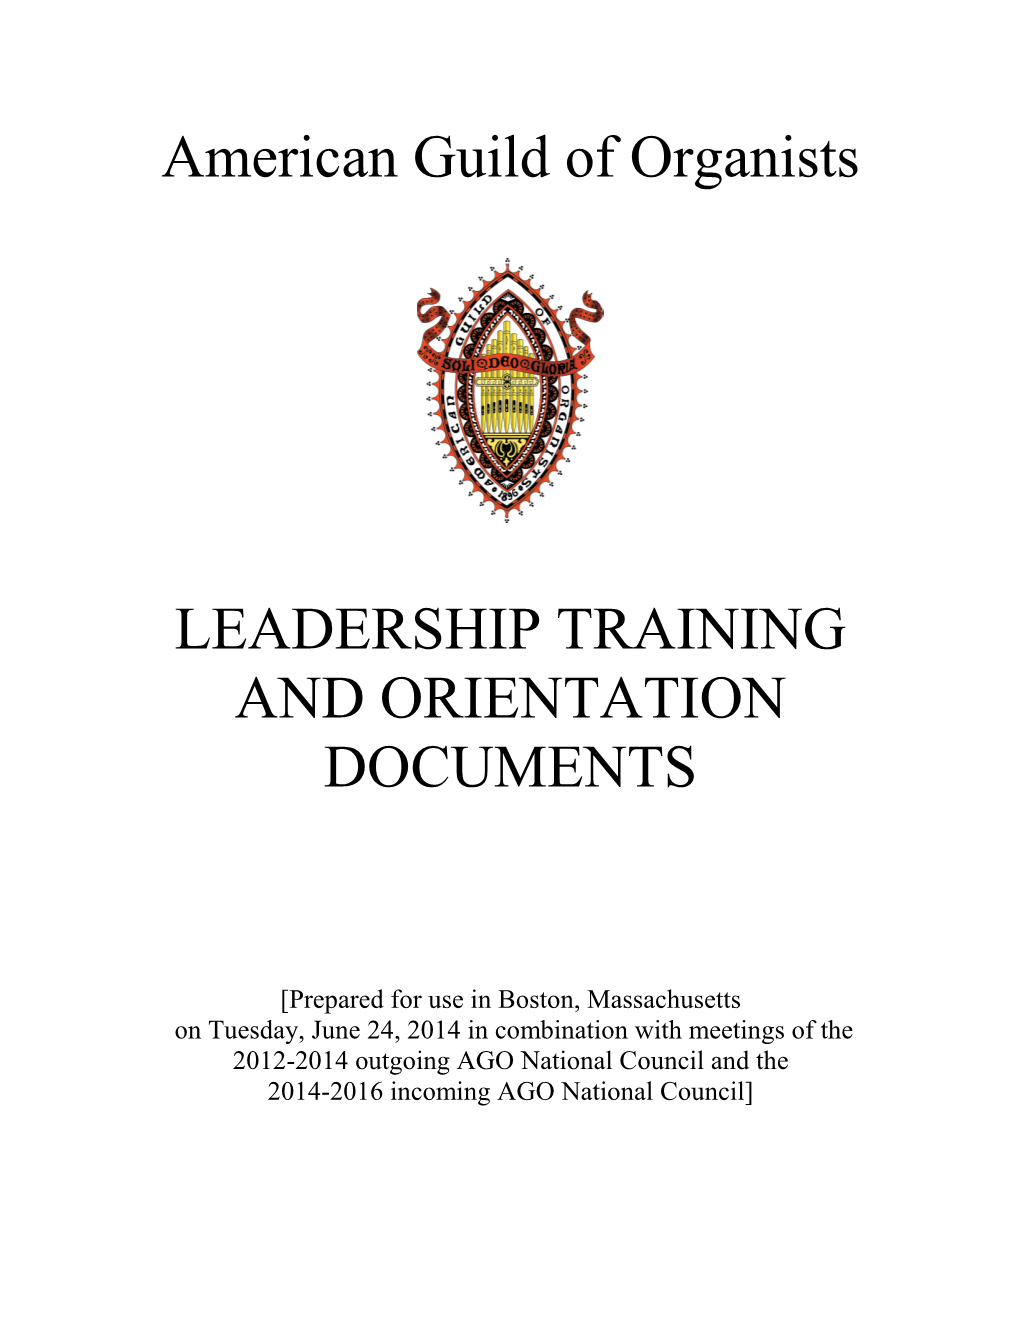 American Guild of Organists LEADERSHIP TRAINING AND